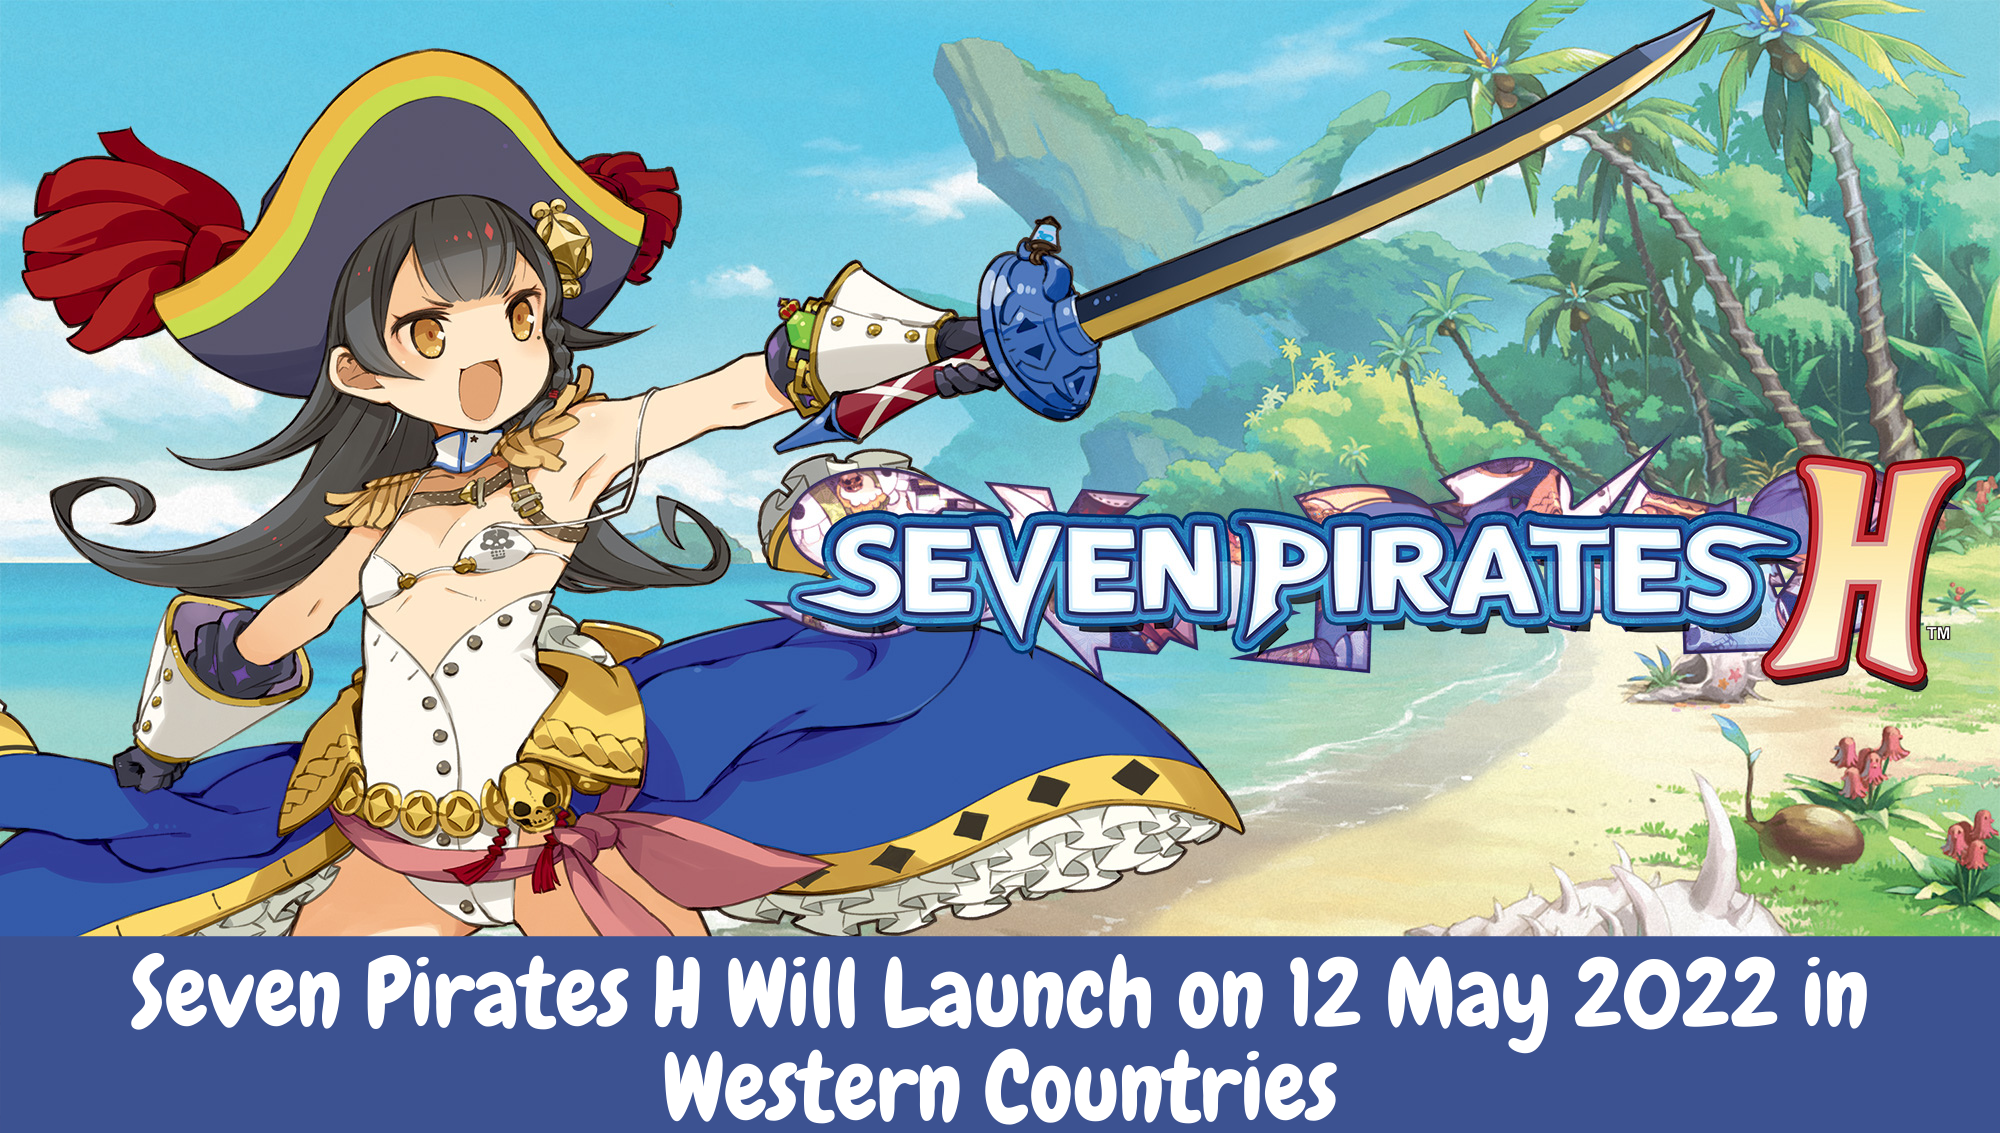 Seven Pirates H Will Launch on 12 May 2022 in Western Countries